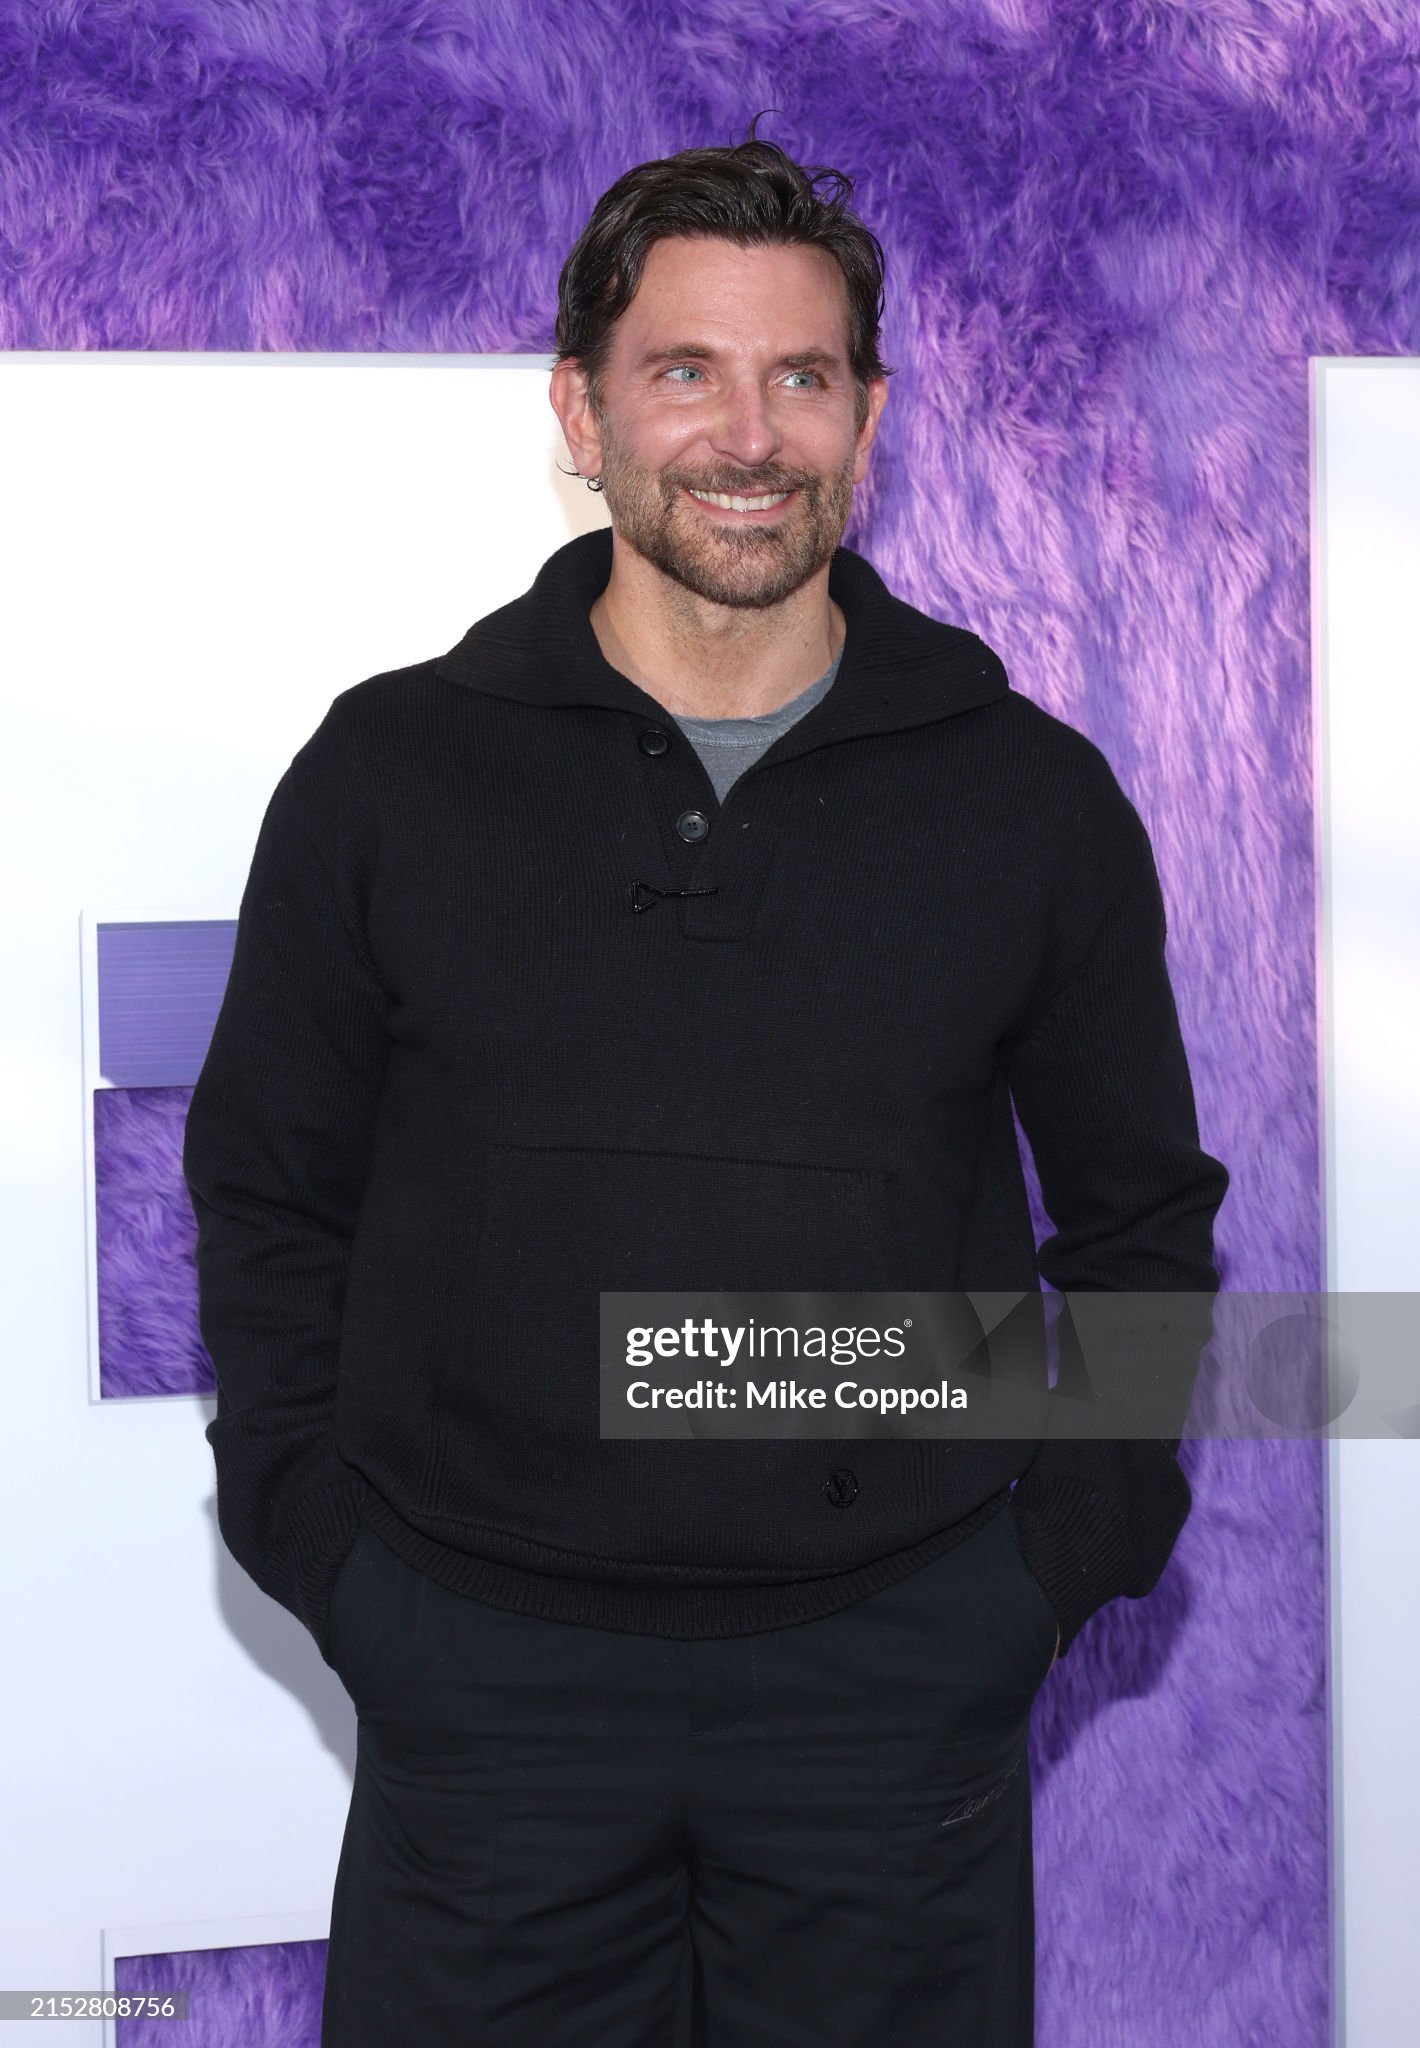 gettyimages-2152808756-2048x2048.jpg